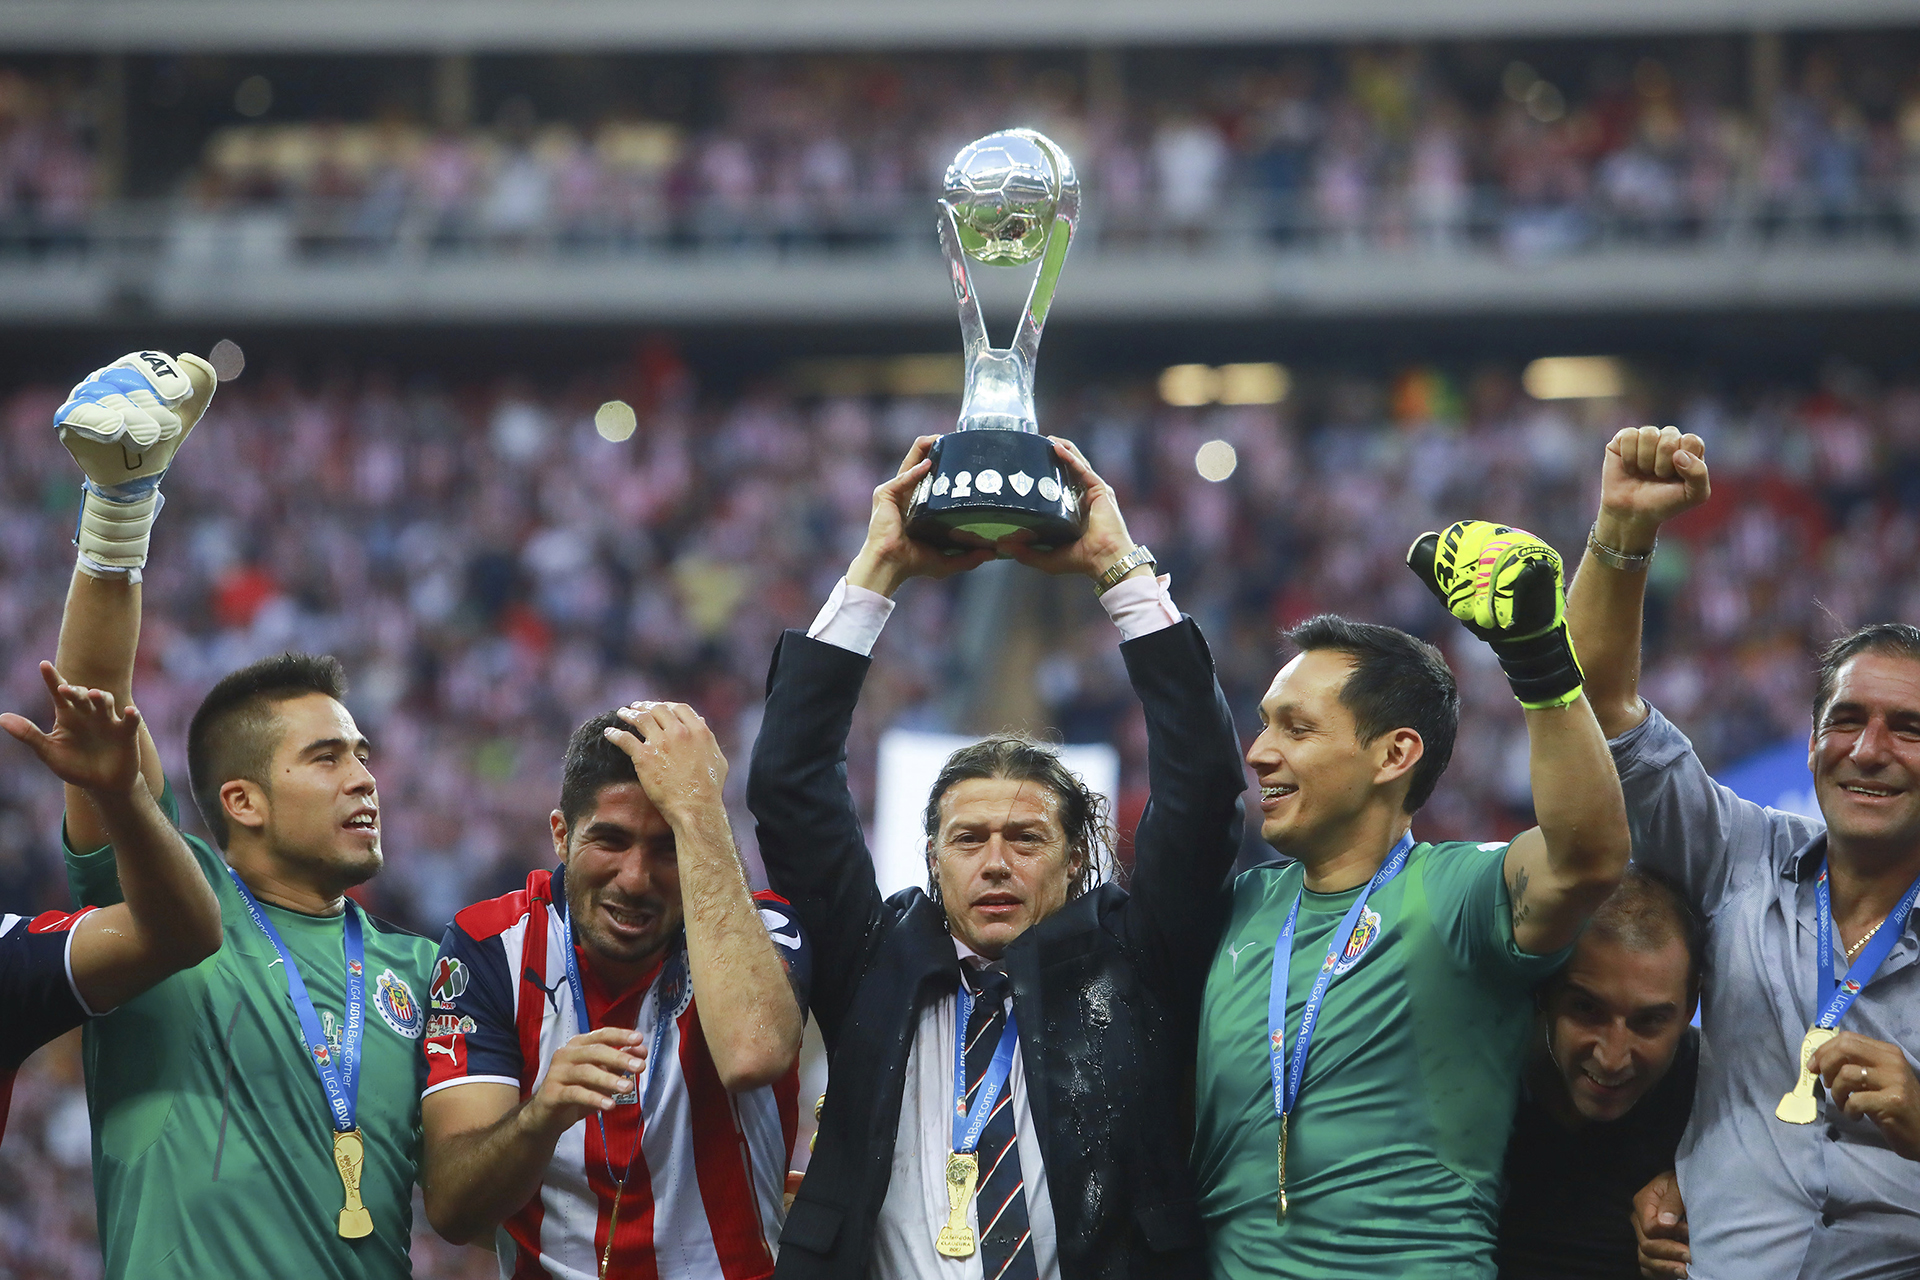 ZAPOPAN, MEXICO - MAY 28:  Matias Almeyda coach of Chivas lifts the champions trophy after the Final second leg match between Chivas and Tigres UANL as part of the Torneo Clausura 2017 Liga MX at Chivas Stadium on May 28, 2017 in Zapopan, Mexico. (Photo by Hector Vivas/LatinContent/Getty Images)